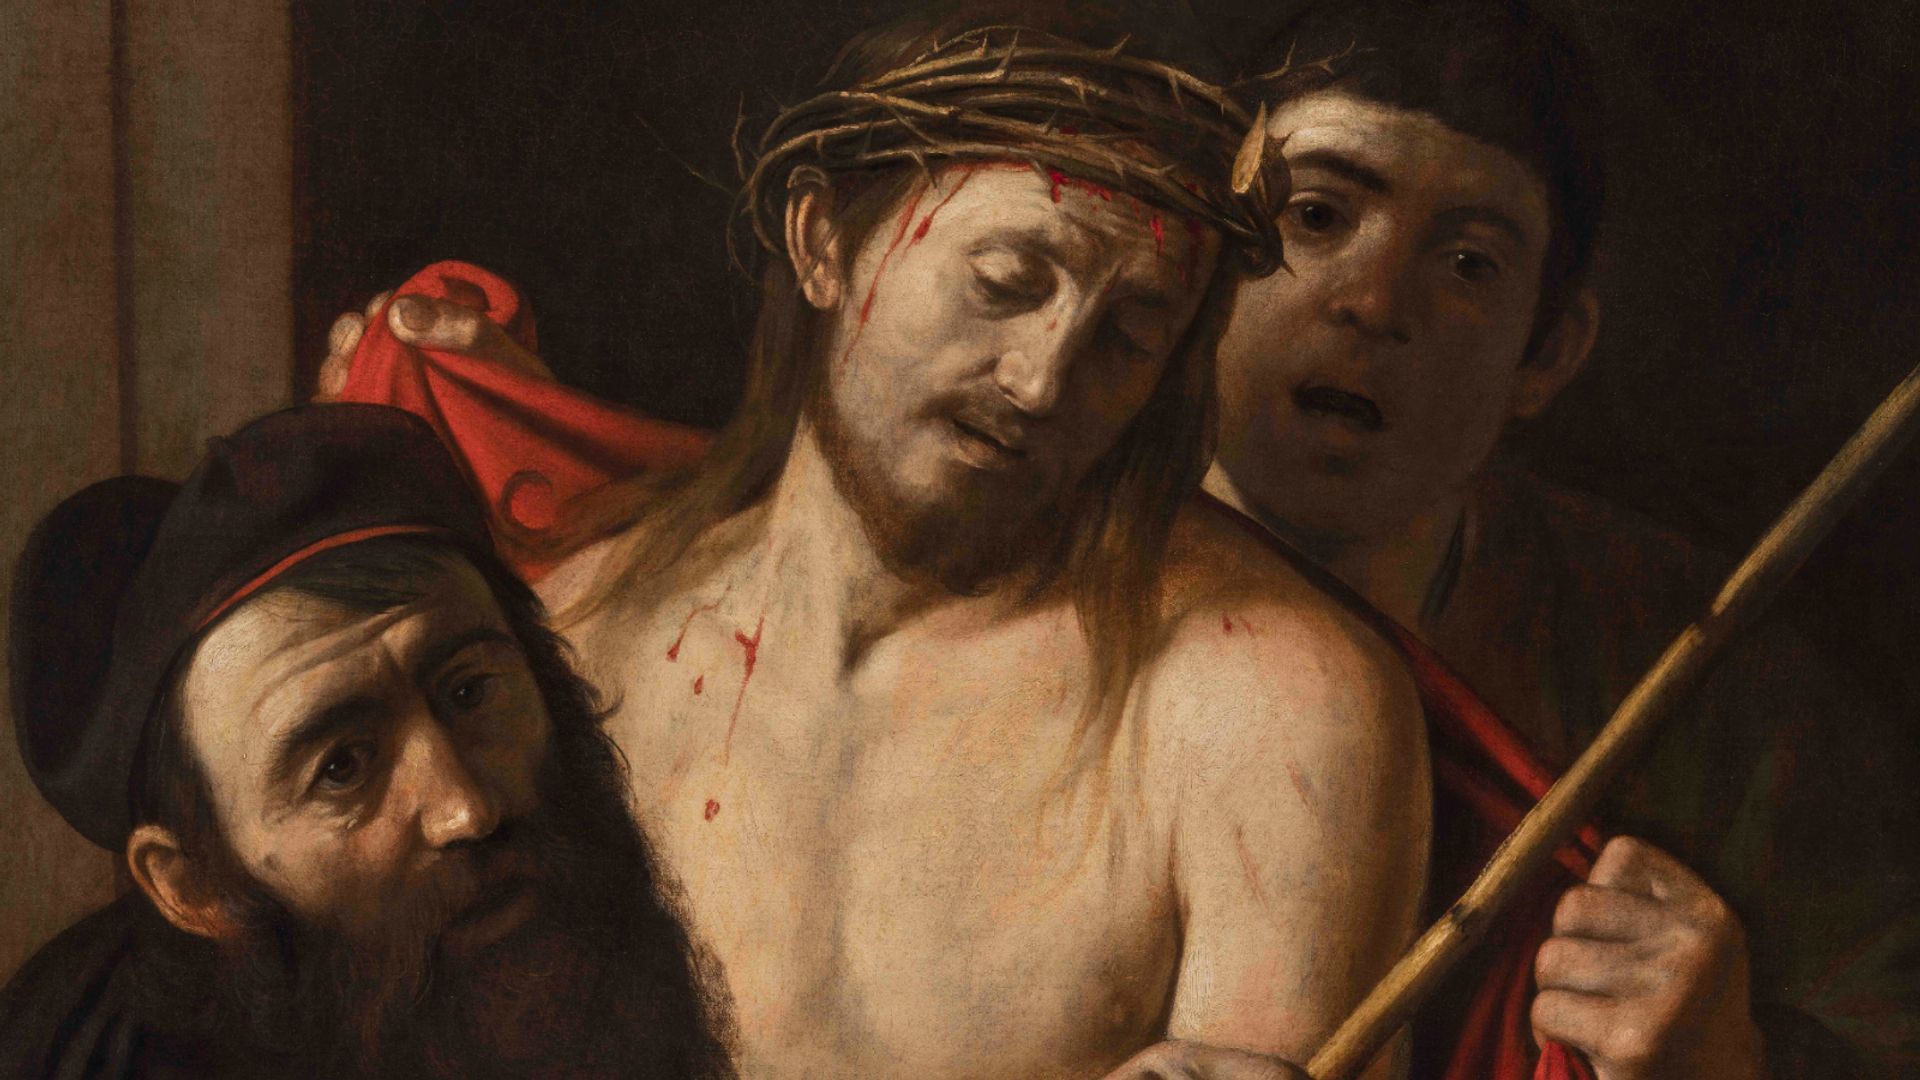 Painting once up for auction for just &#8364;1,500 confirmed as Caravaggio work